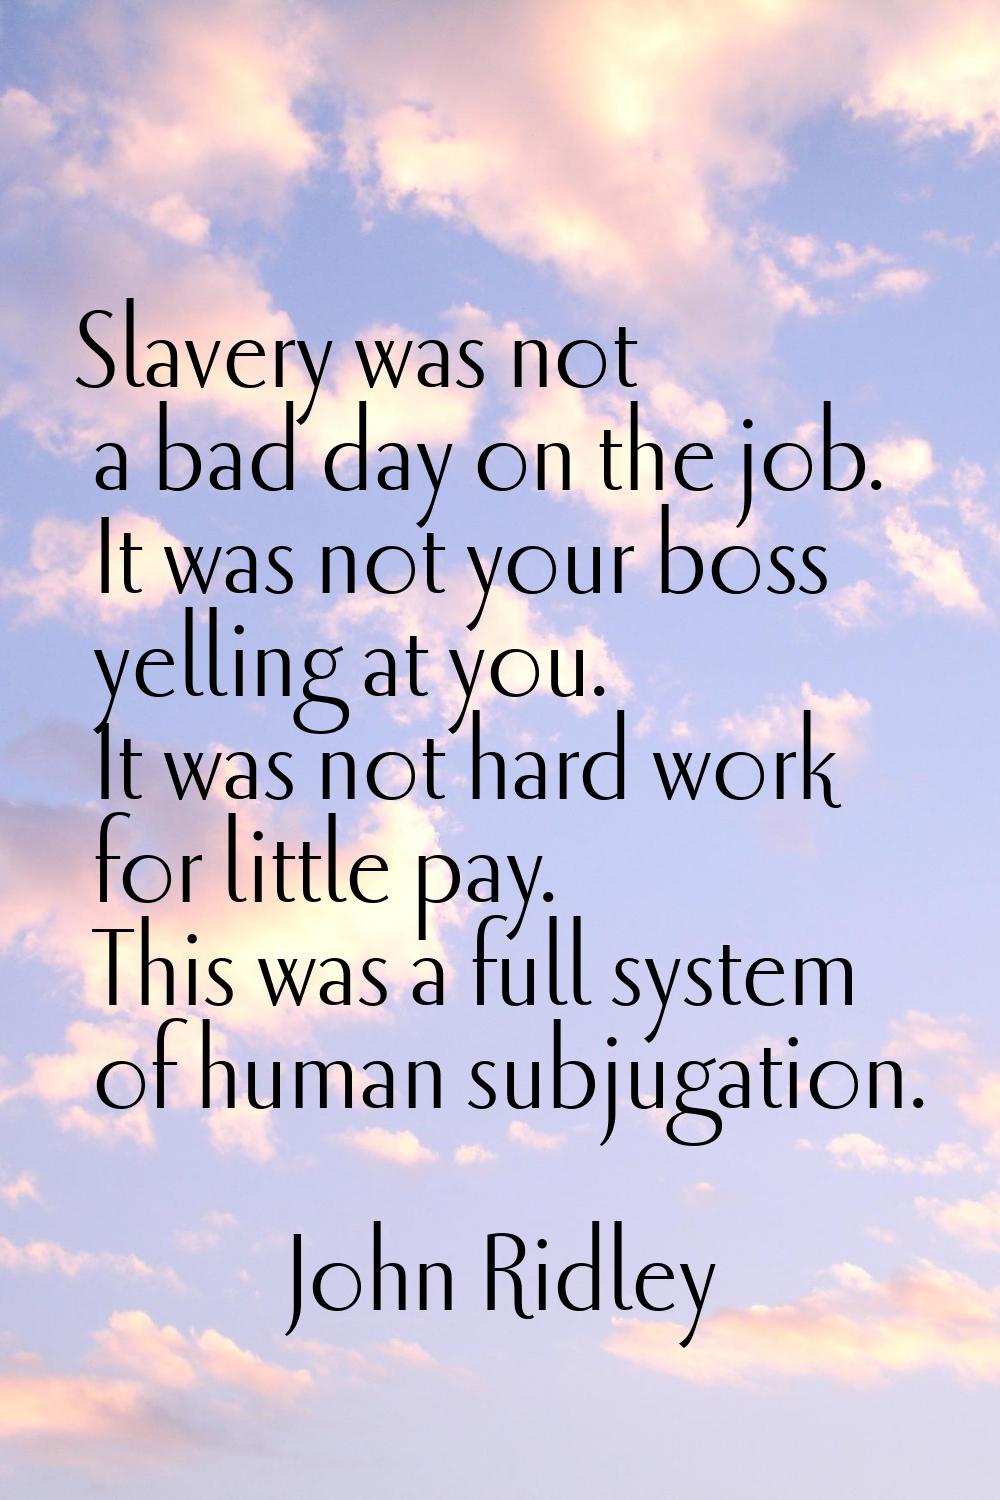 Slavery was not a bad day on the job. It was not your boss yelling at you. It was not hard work for